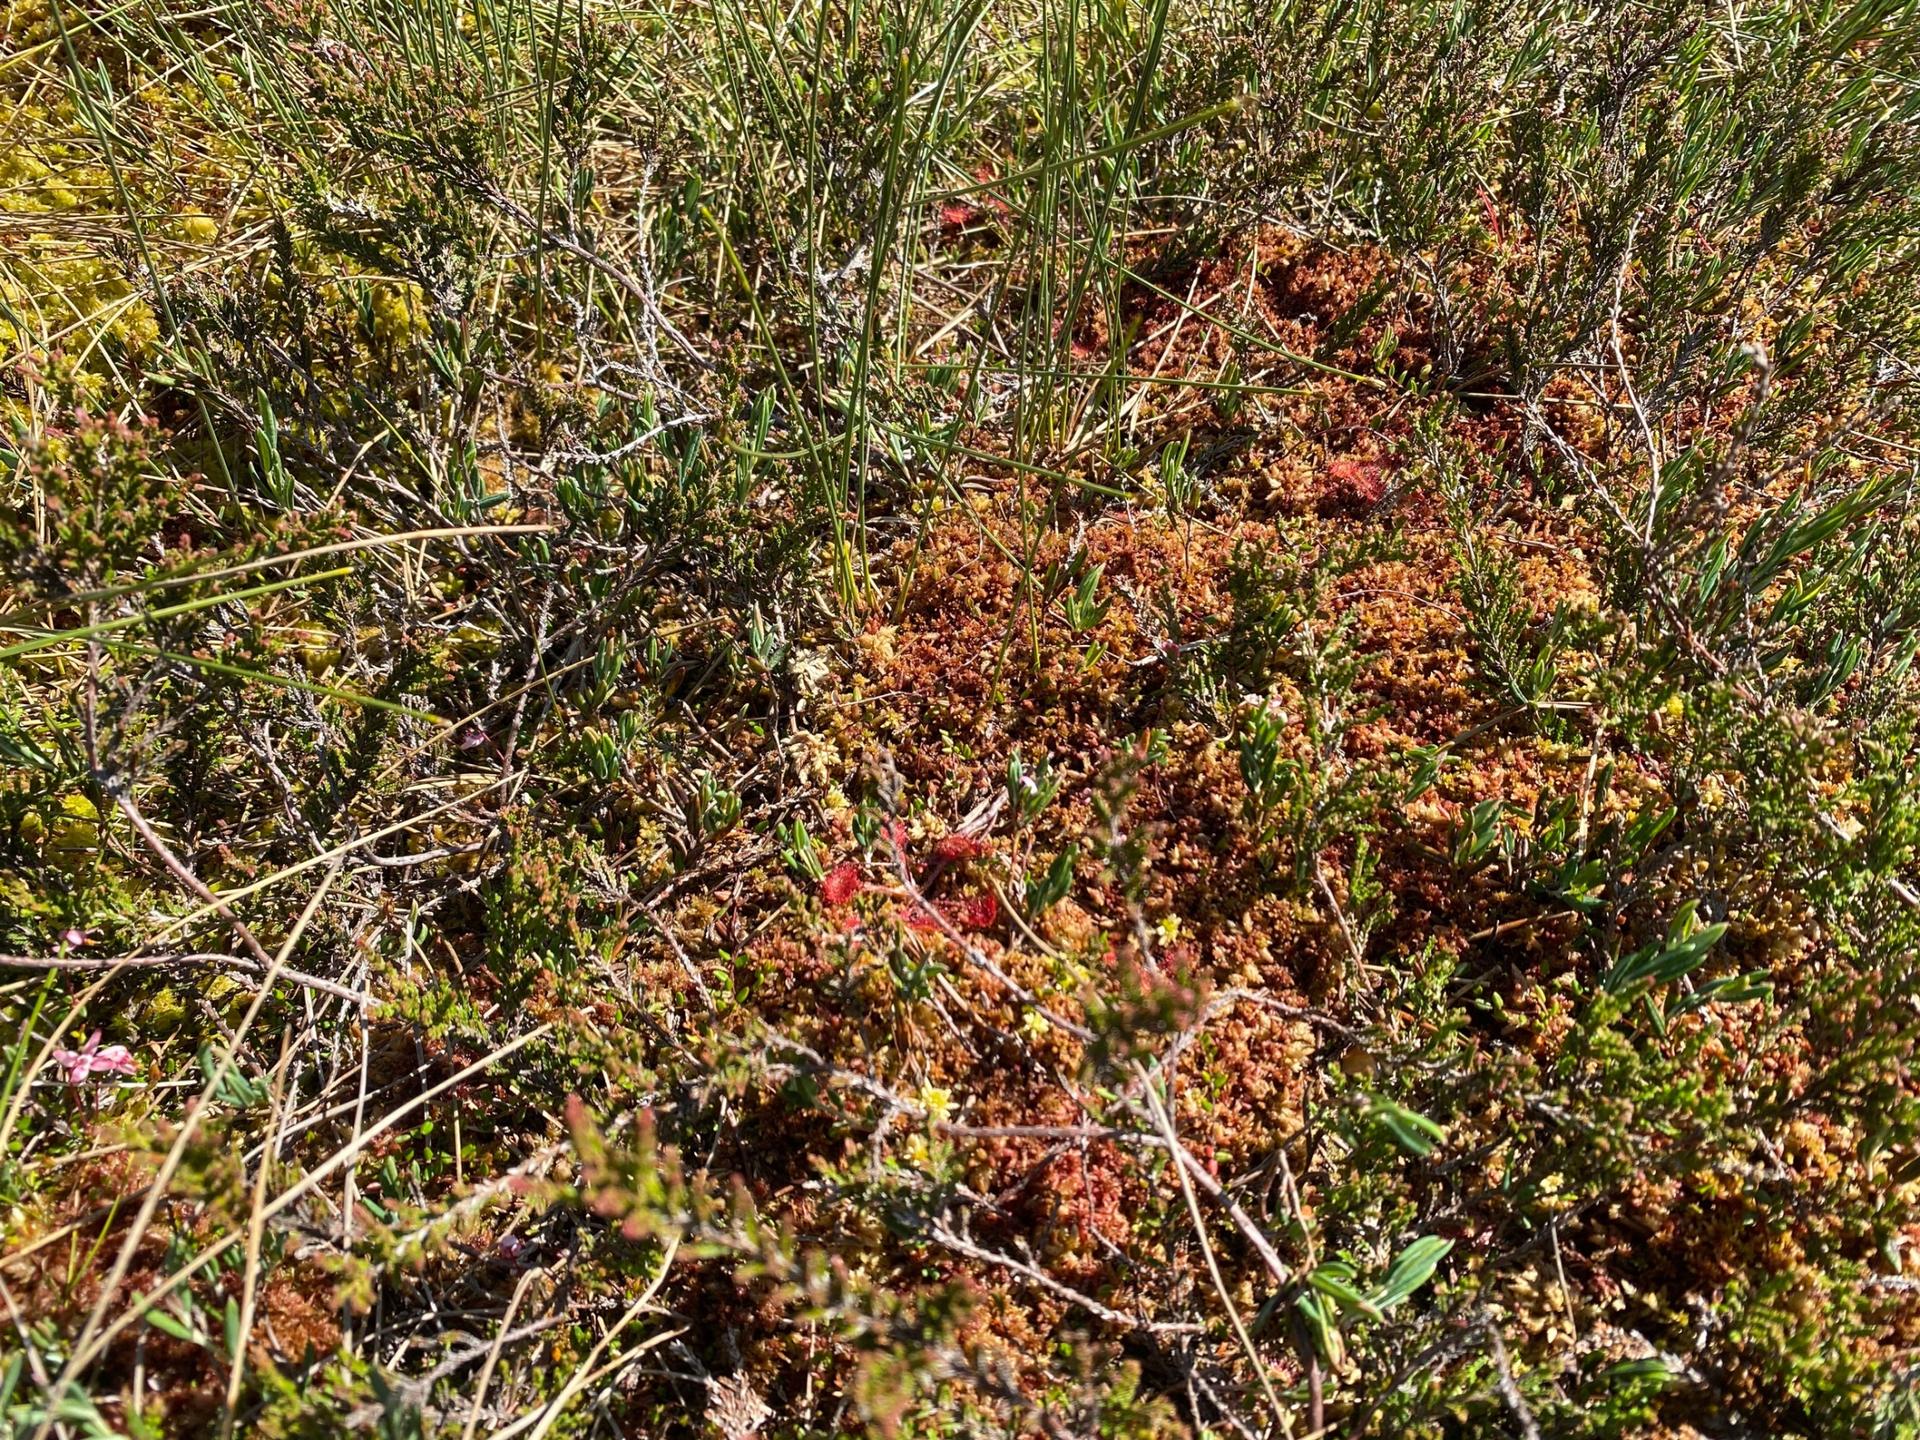 In the nutrient-poor ecosystem of a bog, plants have to get creative. This tiny red specialist plant is a carnivore, trapping and eating insects.